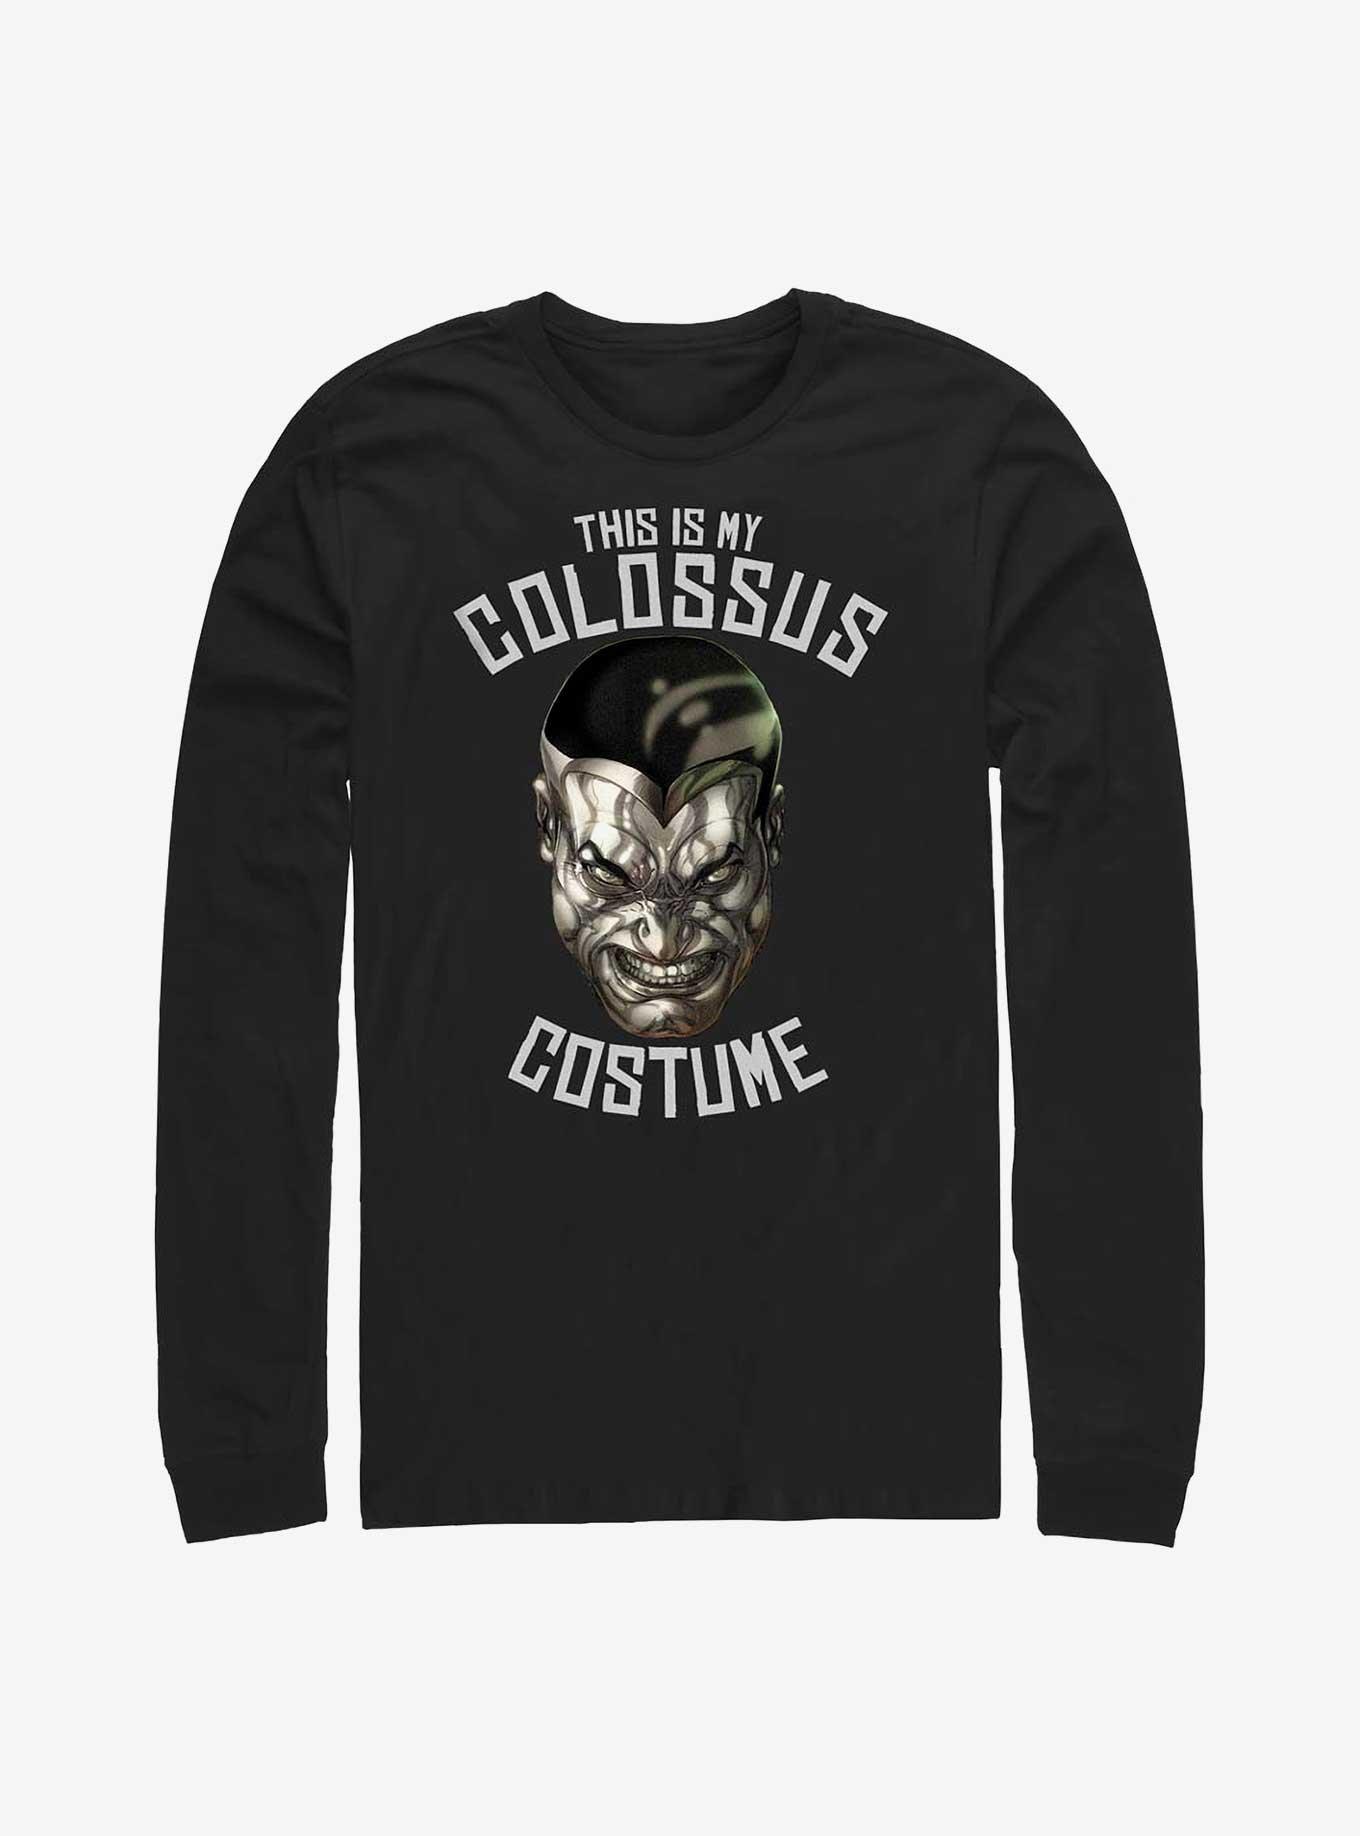 Marvel X-Men This Is My Colossus Costume Long-Sleeve T-Shirt